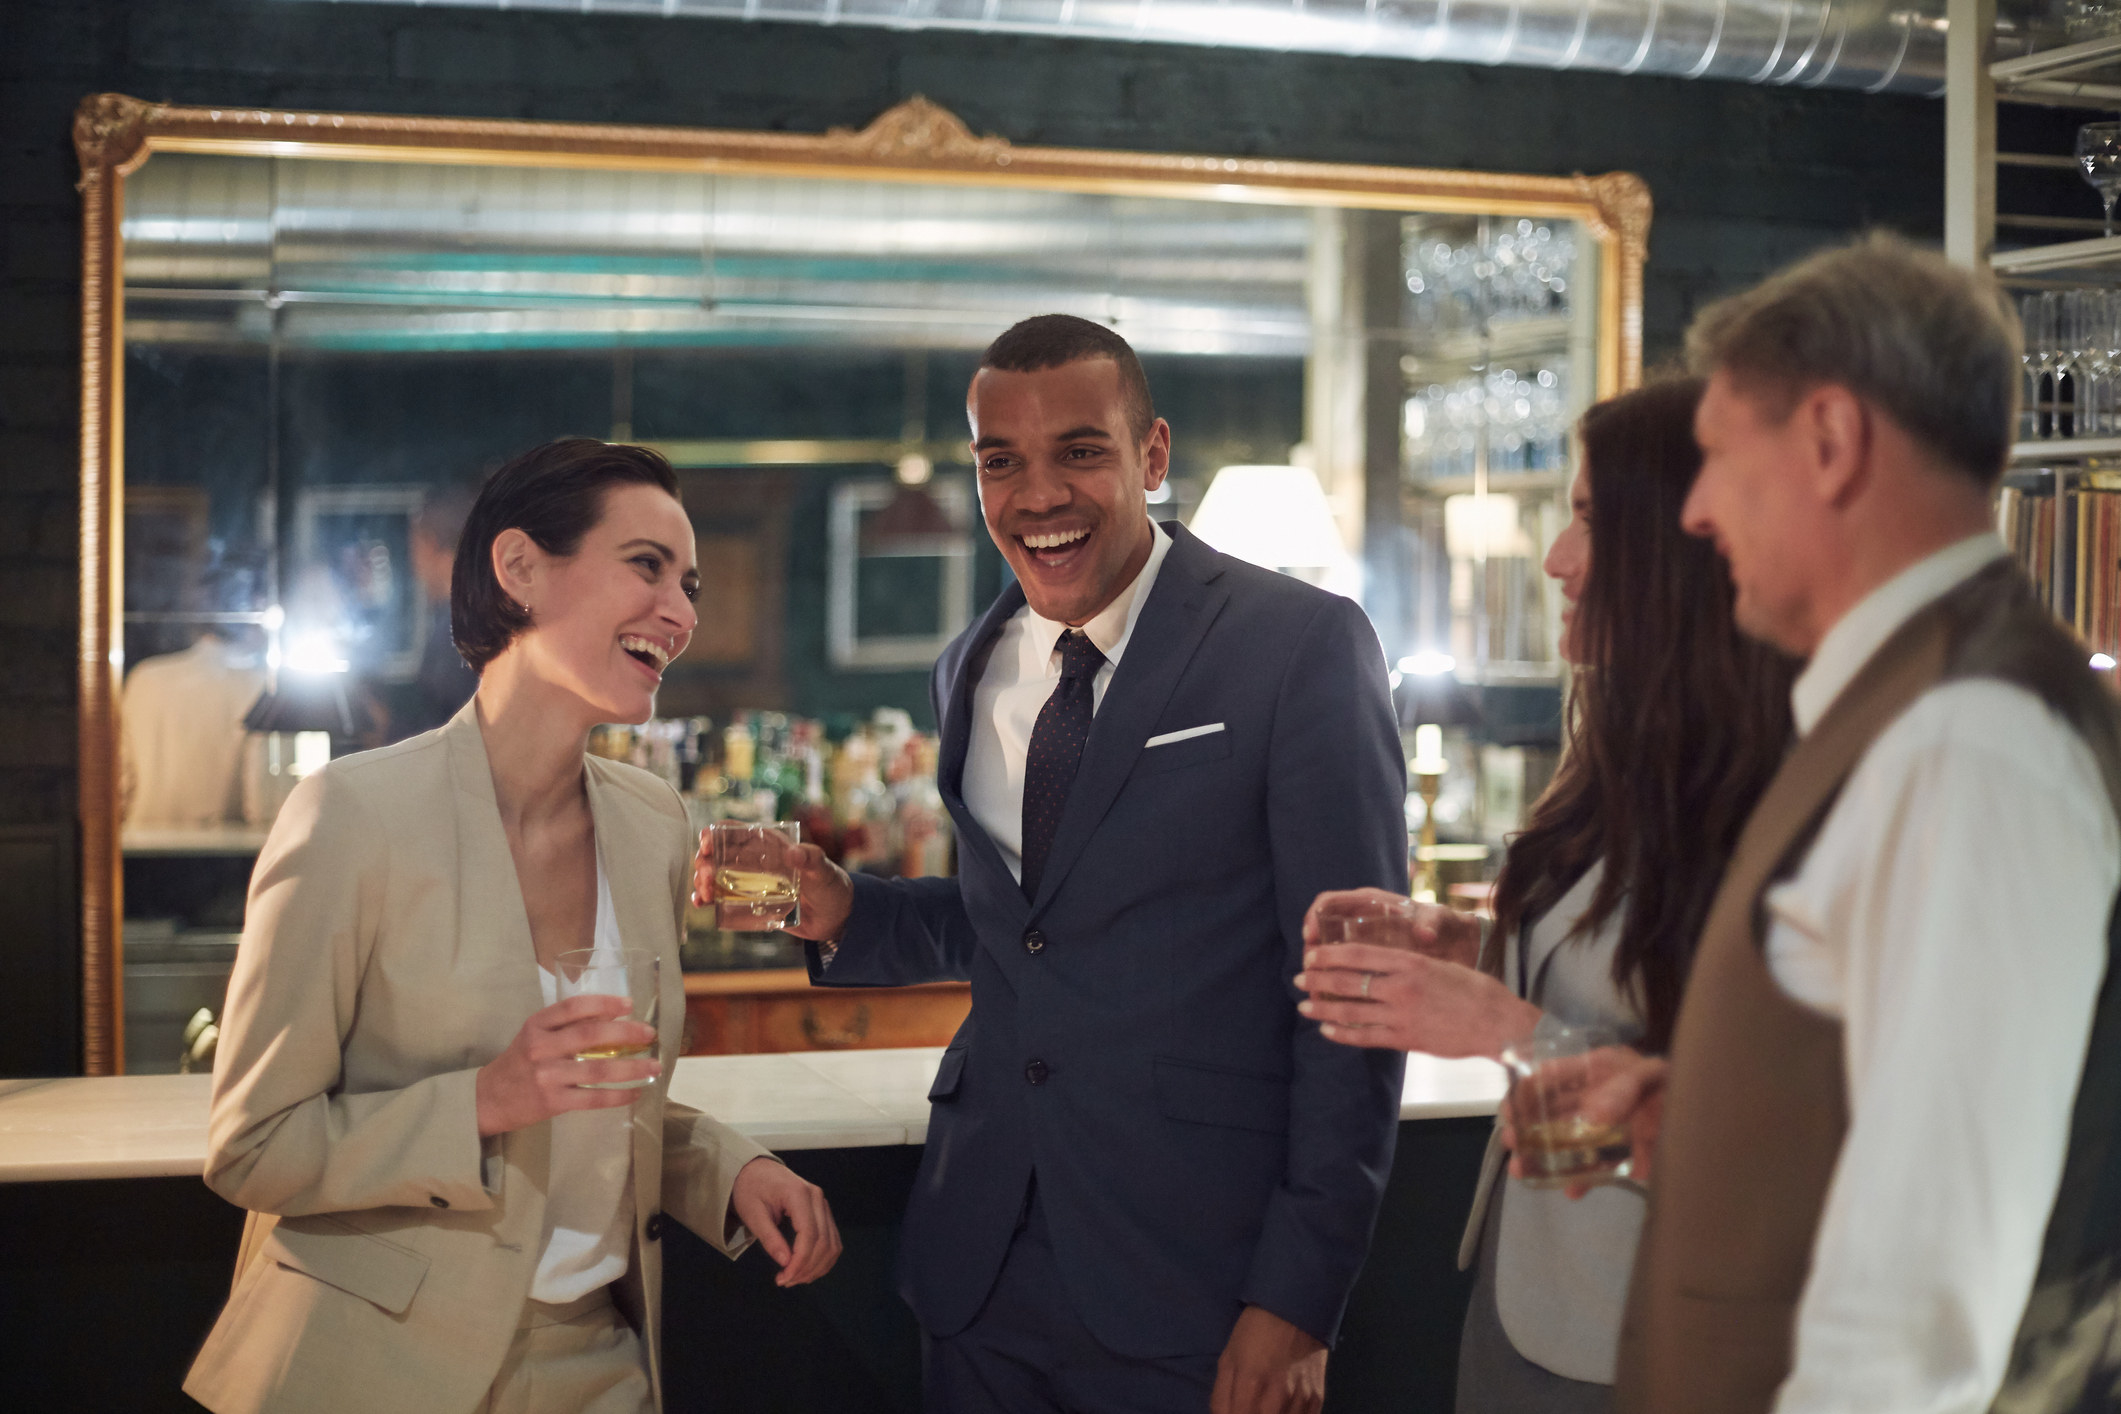 A group of nicely dressed people drinking at a bar